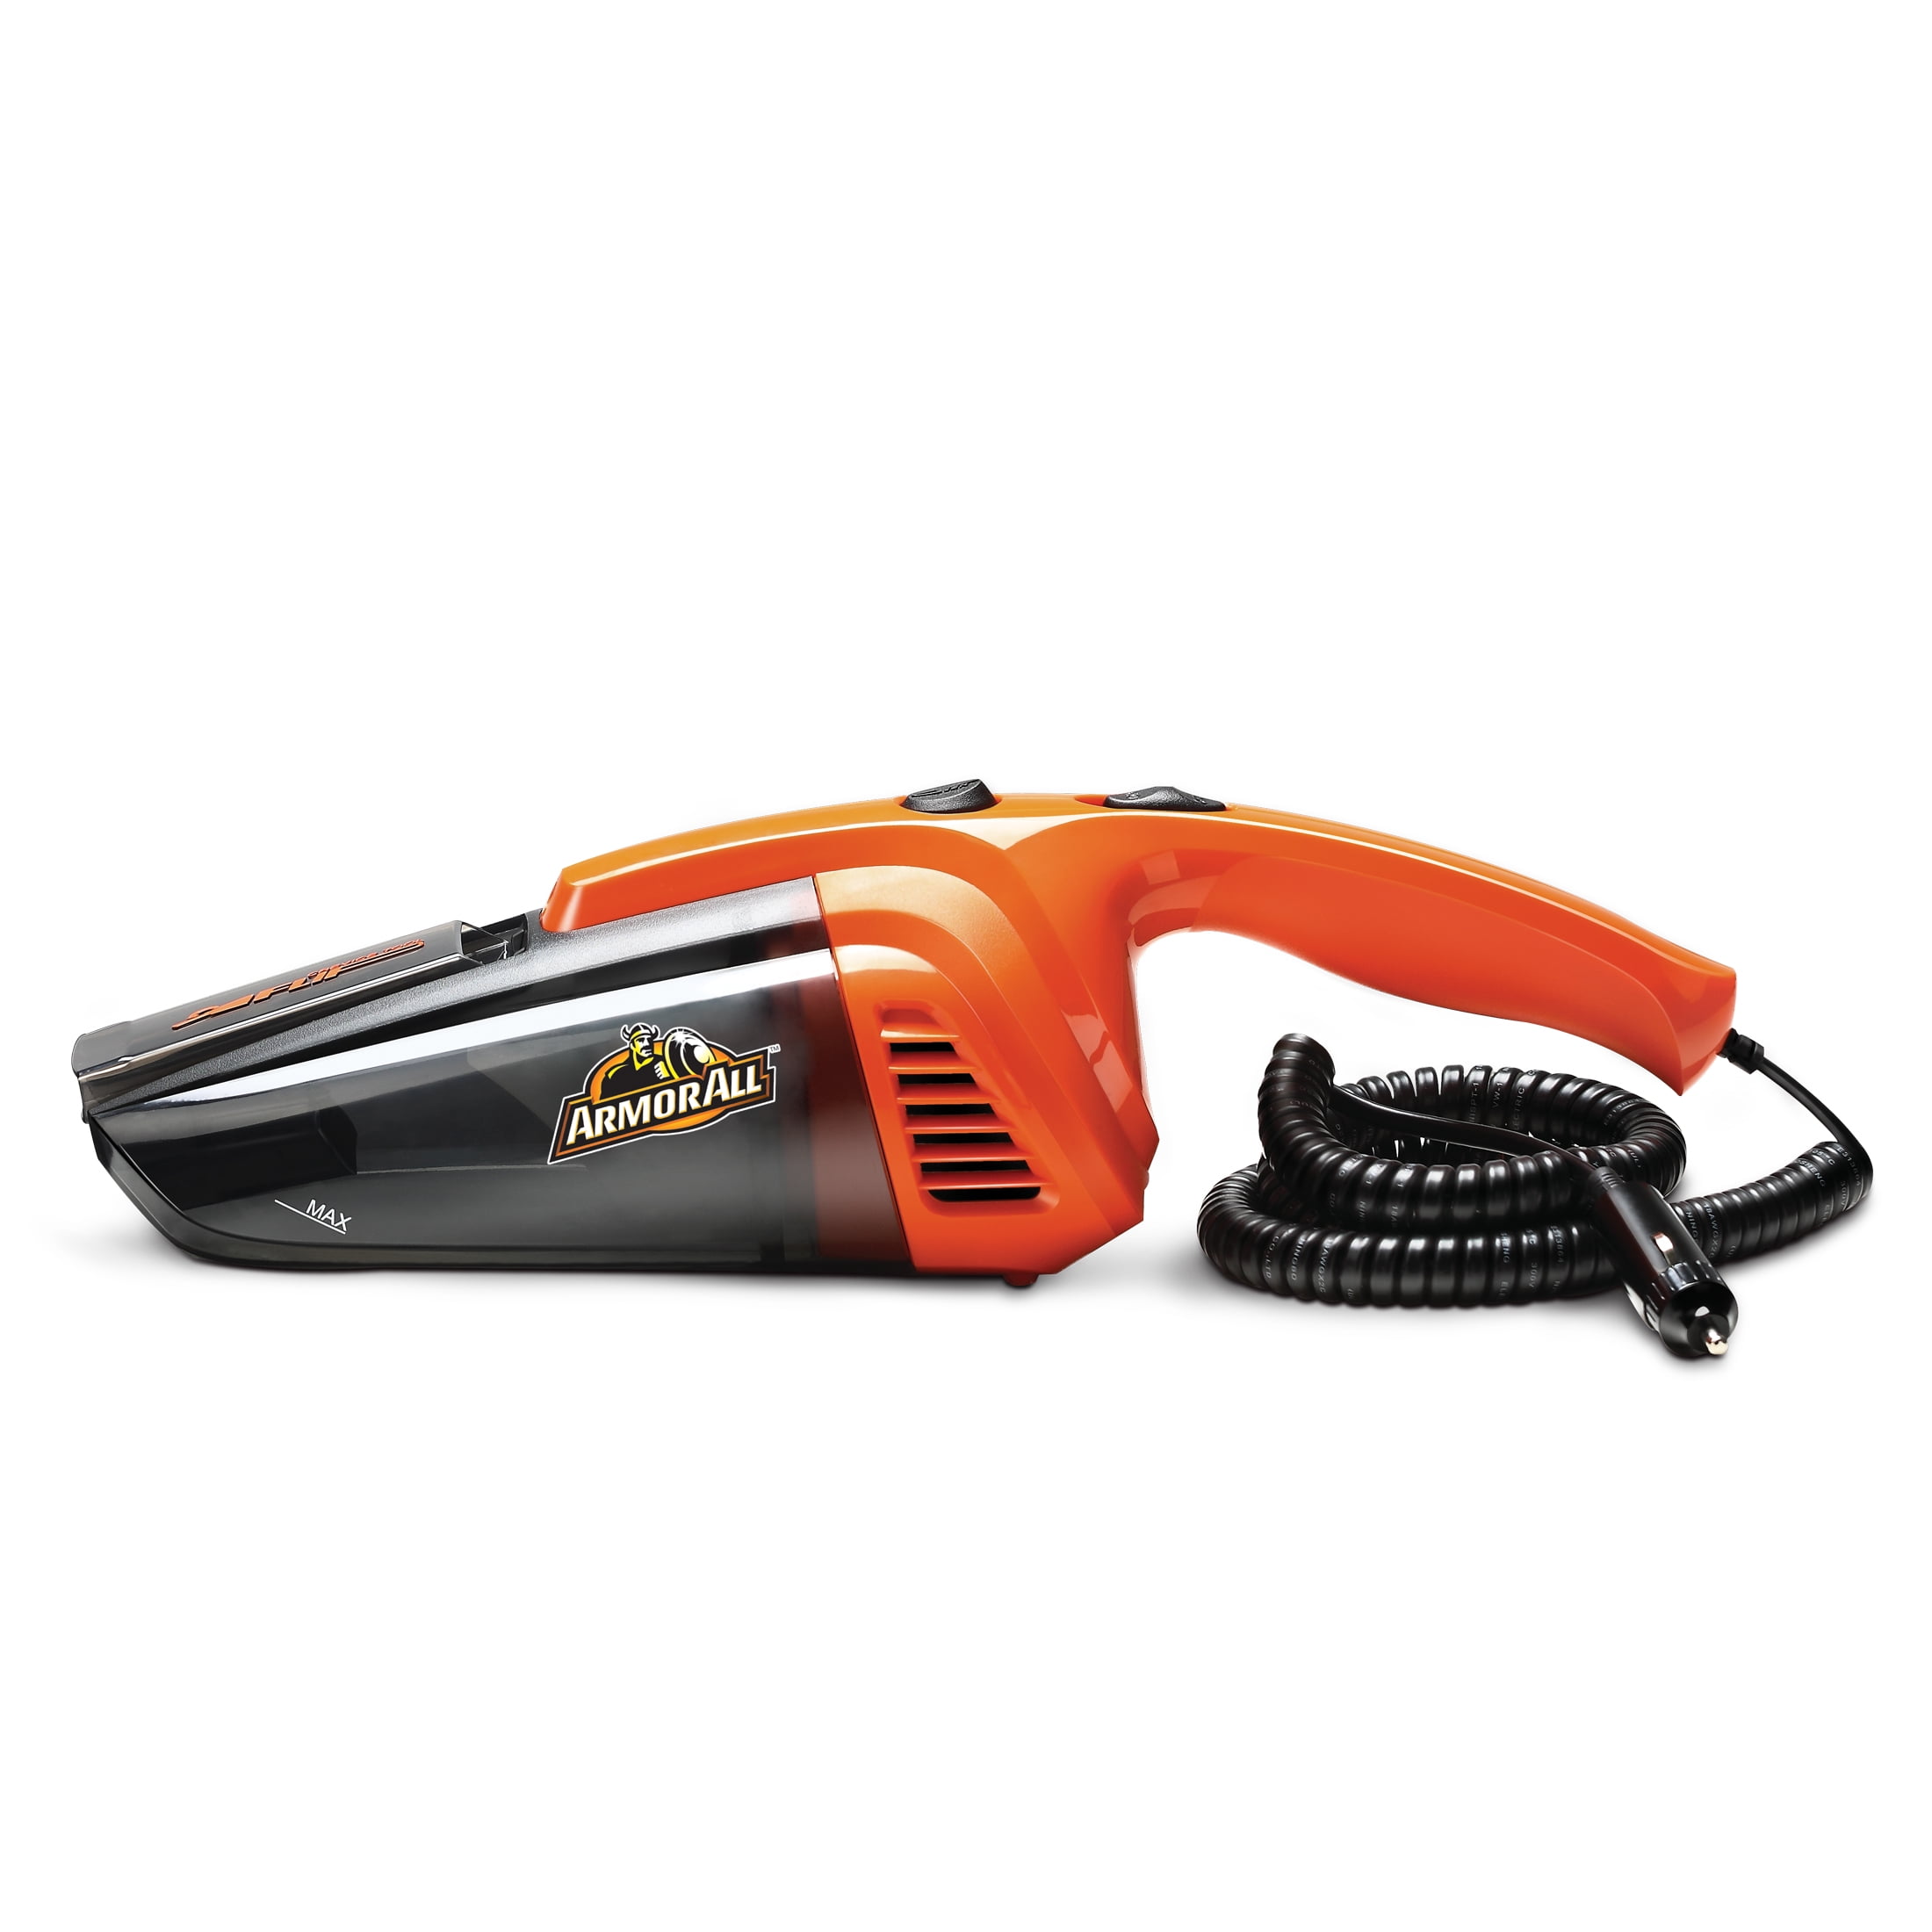 Car Vacuum, Costech Portable Hand-Held 120W Powerful Suction Handheld